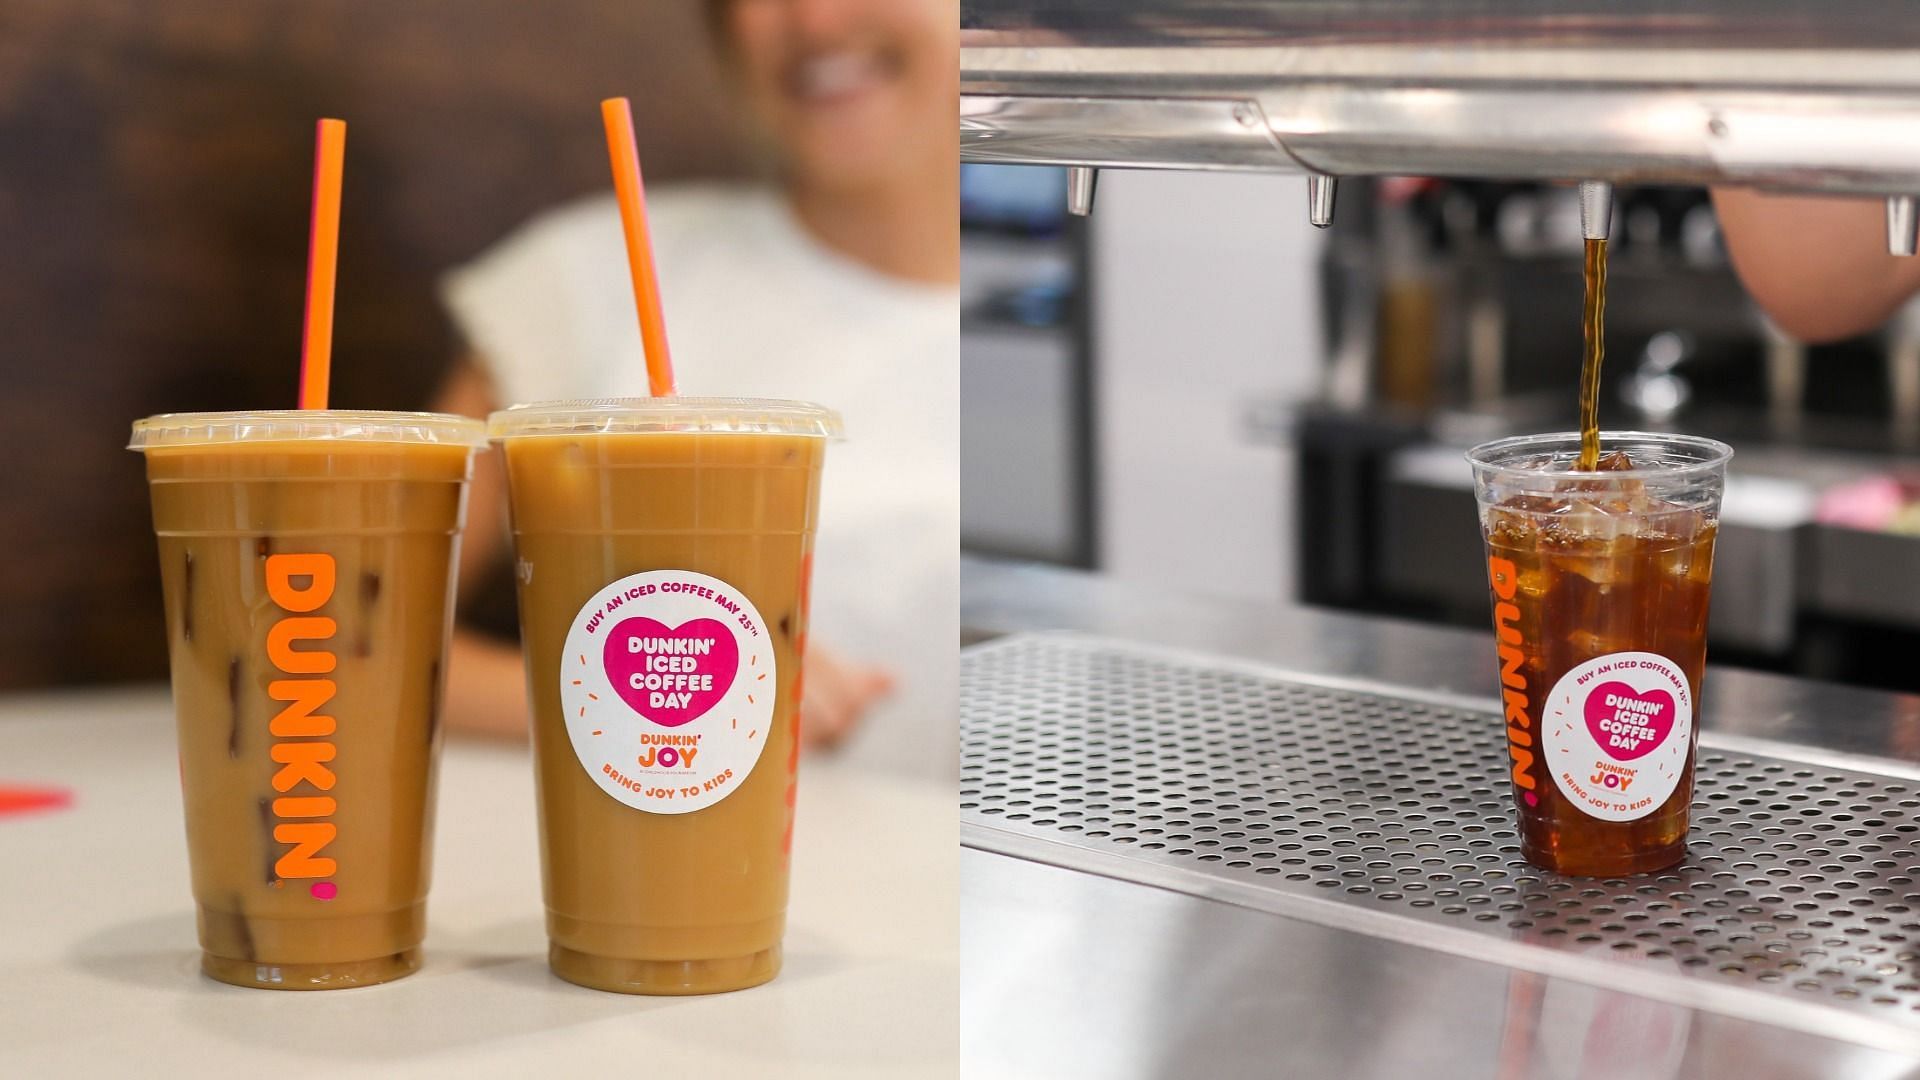 Dunkin&rsquo; is donating $1 from every iced coffee purchased this Iced Coffee Day (May 25) to children&rsquo;s hospitals (Images via Dunkin&rsquo;)